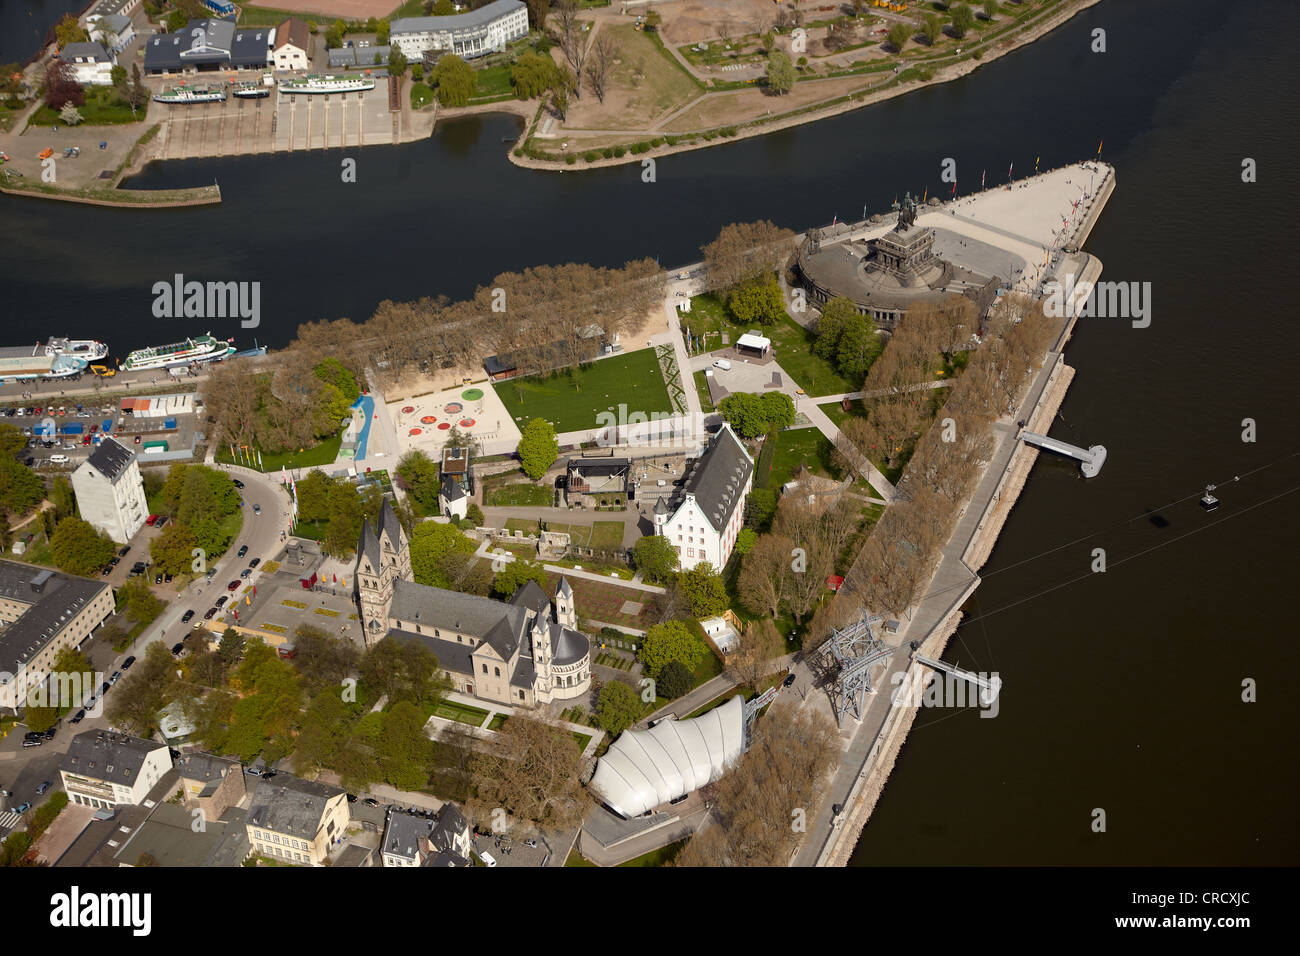 Aerial view, site of the Federal Garden Show 2011 at the Deutsches Eck headland, Koblenz, Rhineland-Palatinate, Germany, Europe Stock Photo